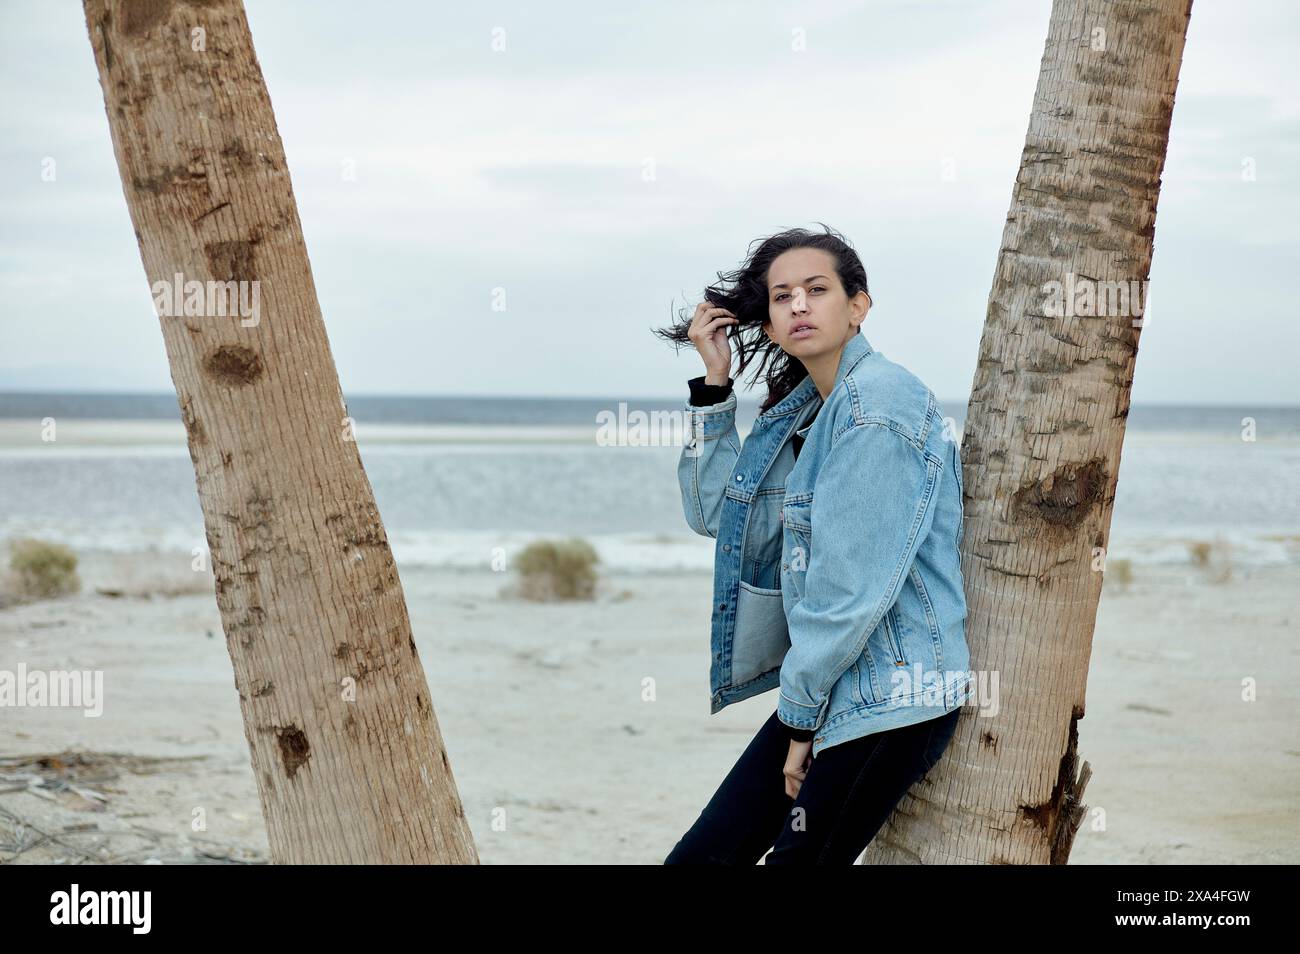 A person stands between two palm trees on a sandy beach, wearing a denim jacket and black pants, looking into the distance with a thoughtful expression. Stock Photo